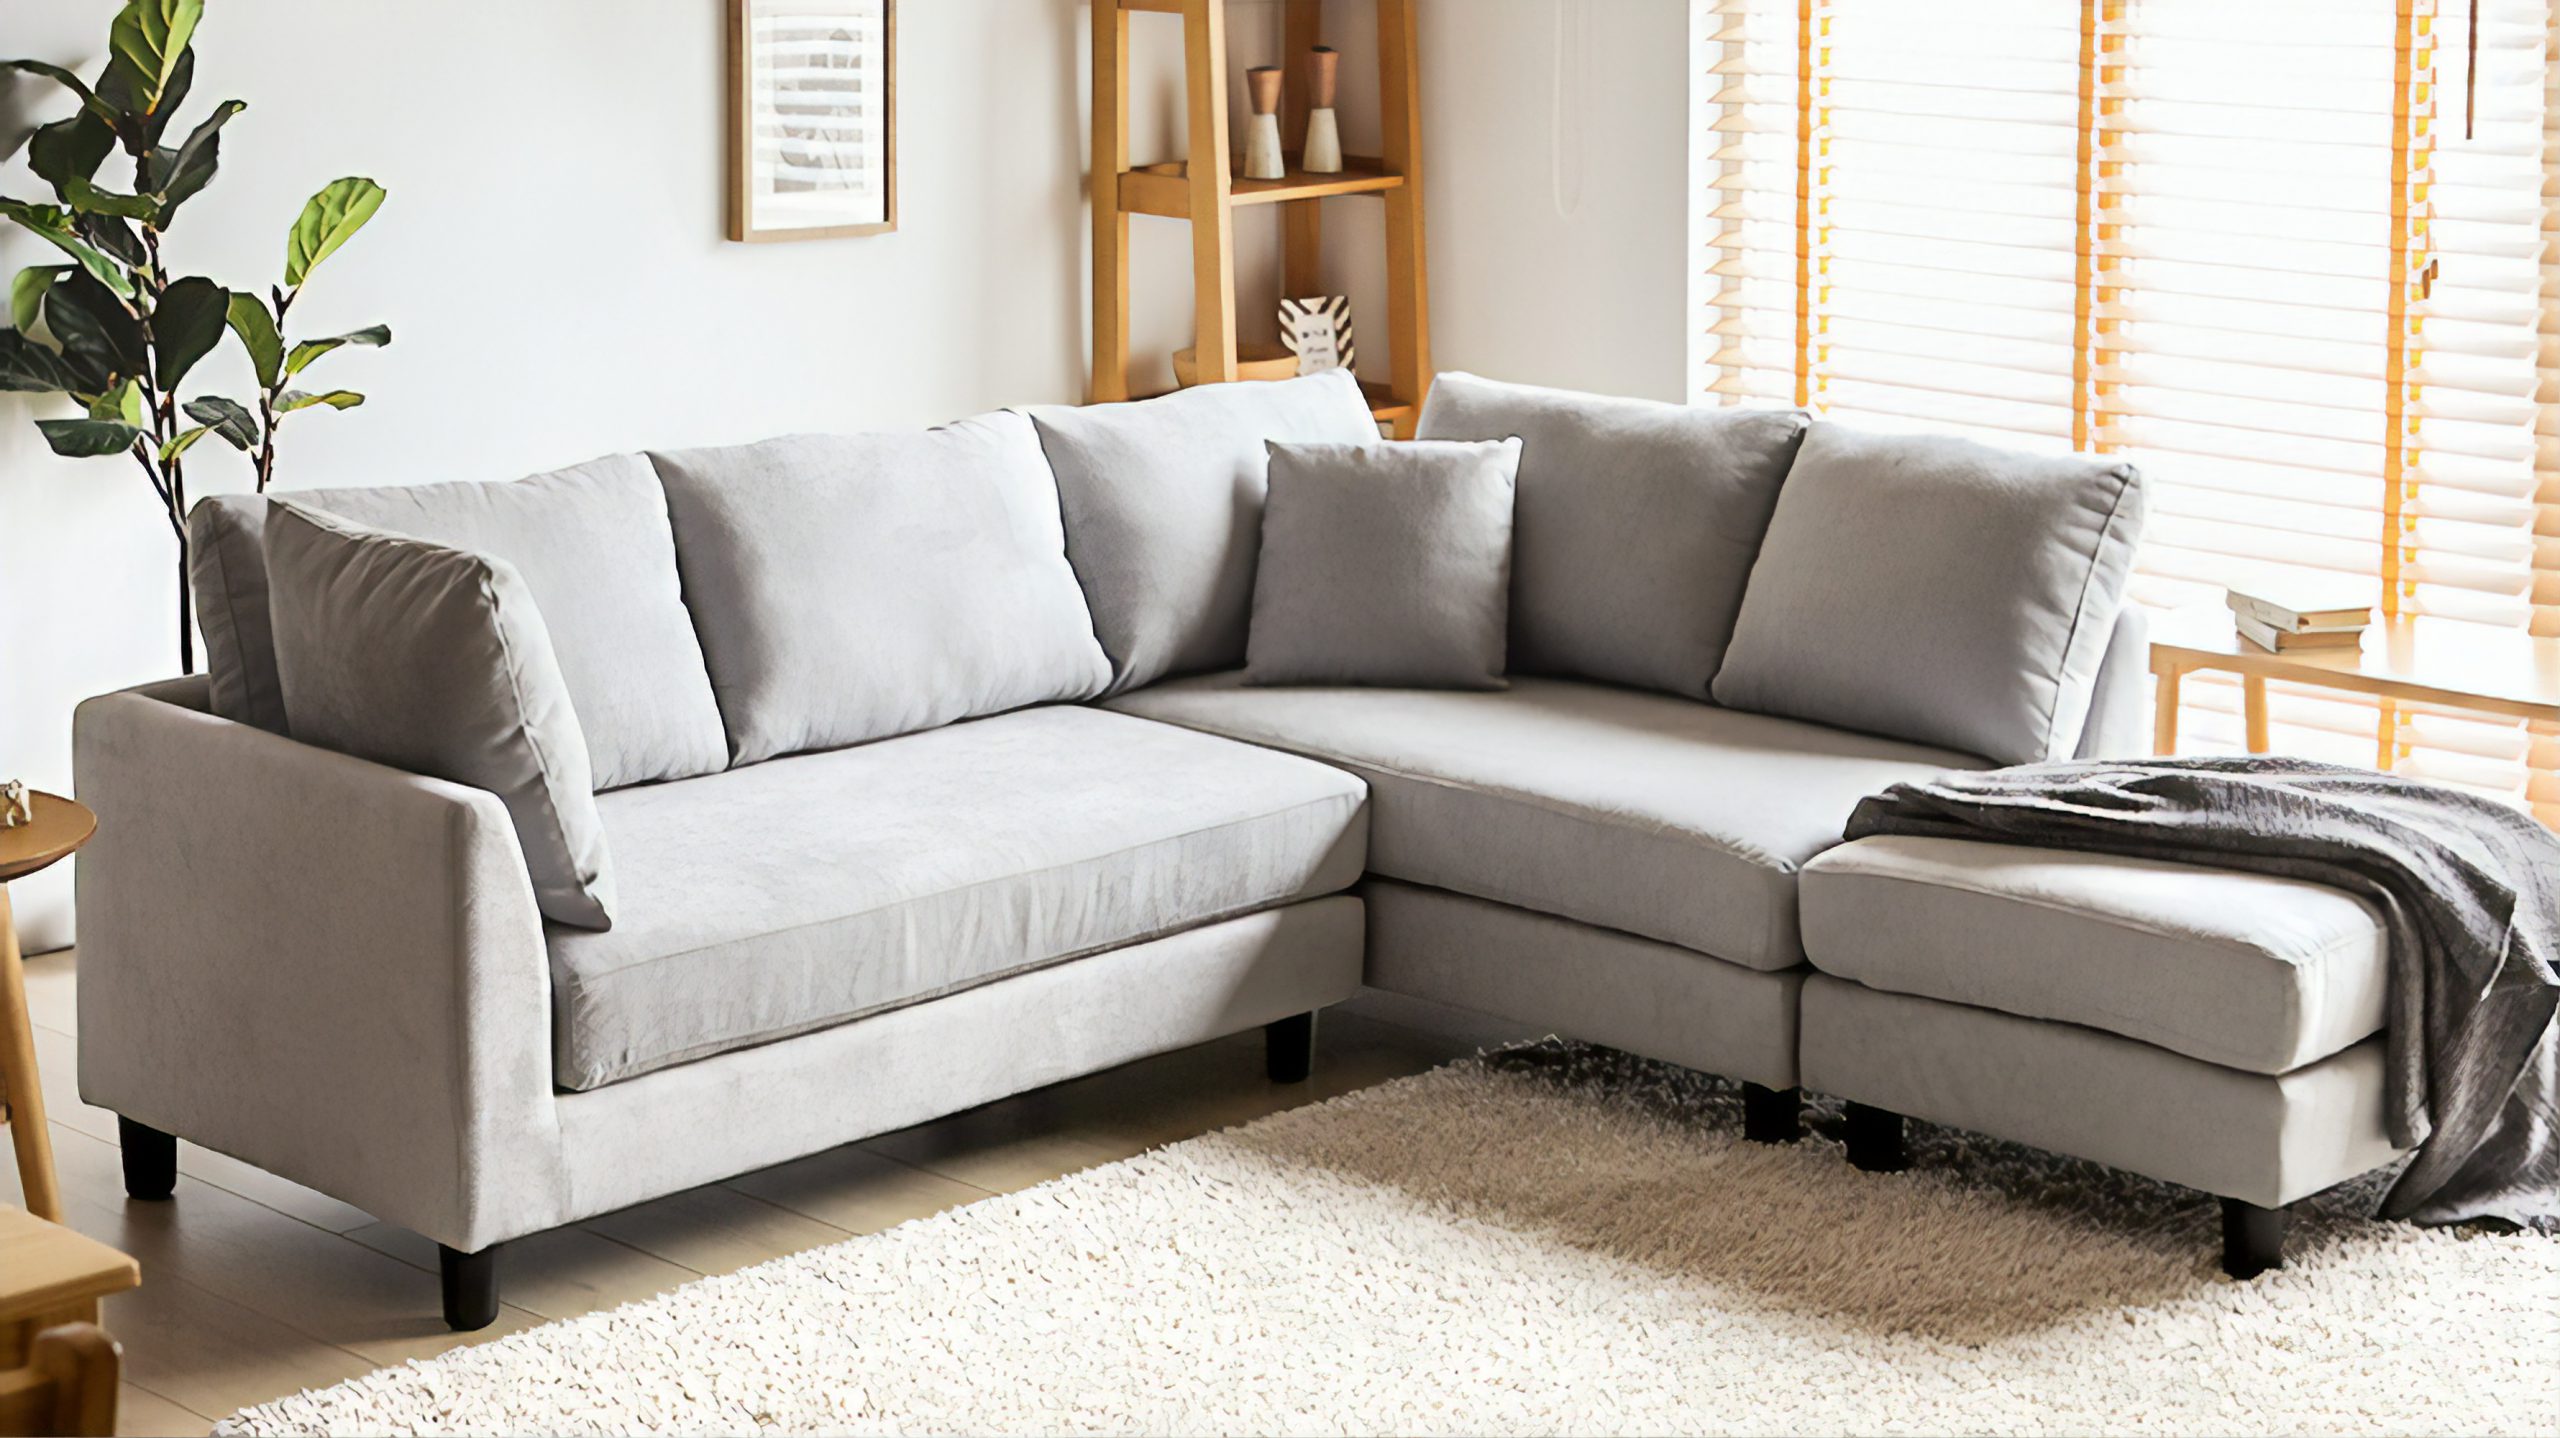 L Shaped Sofas great for awkward corner spaces.